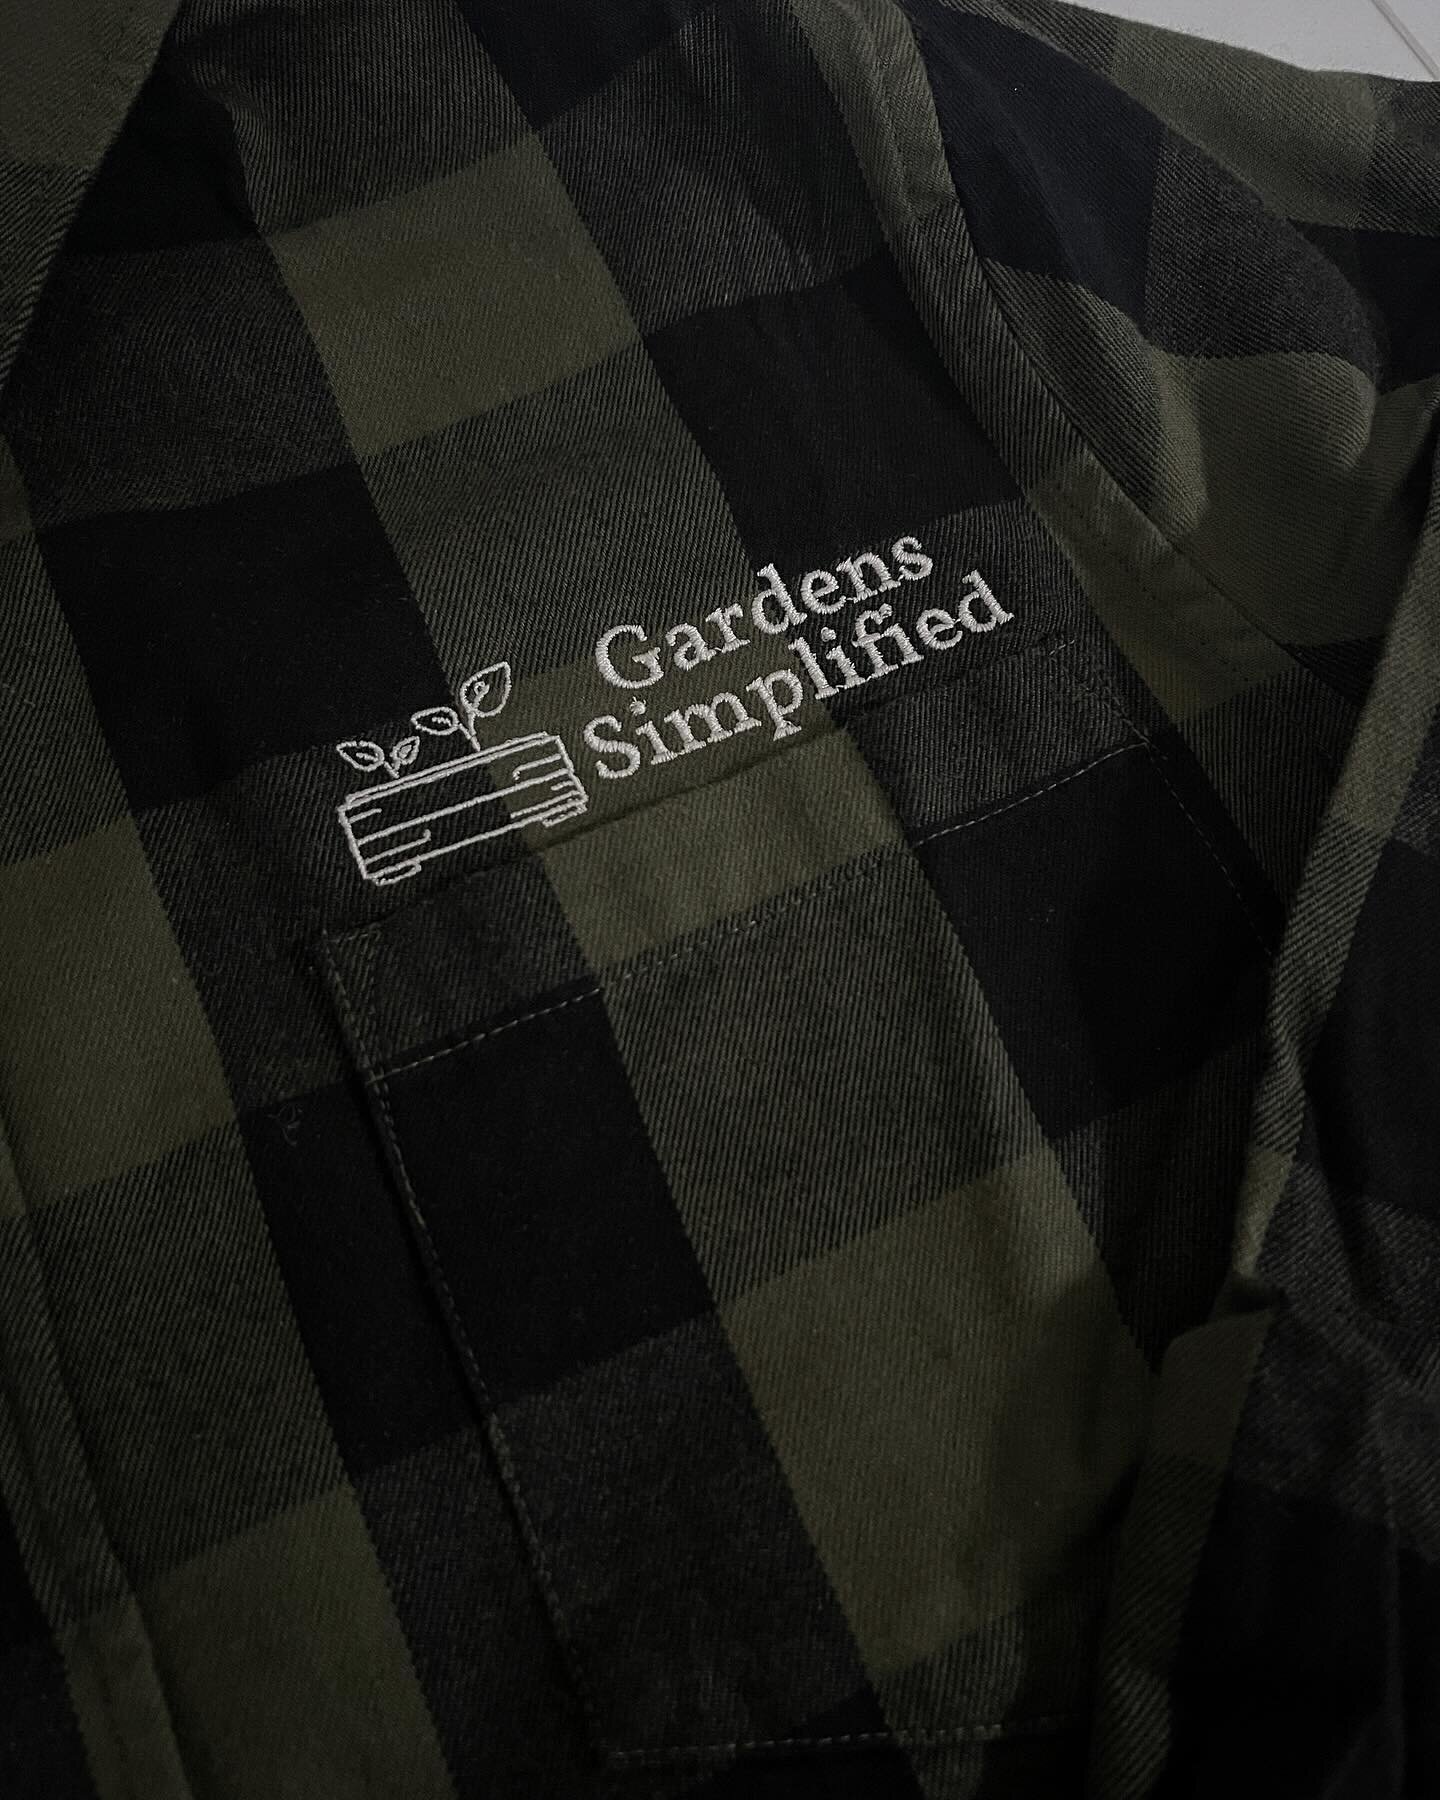 Pocket placement for our good friends at @gardens.simplified